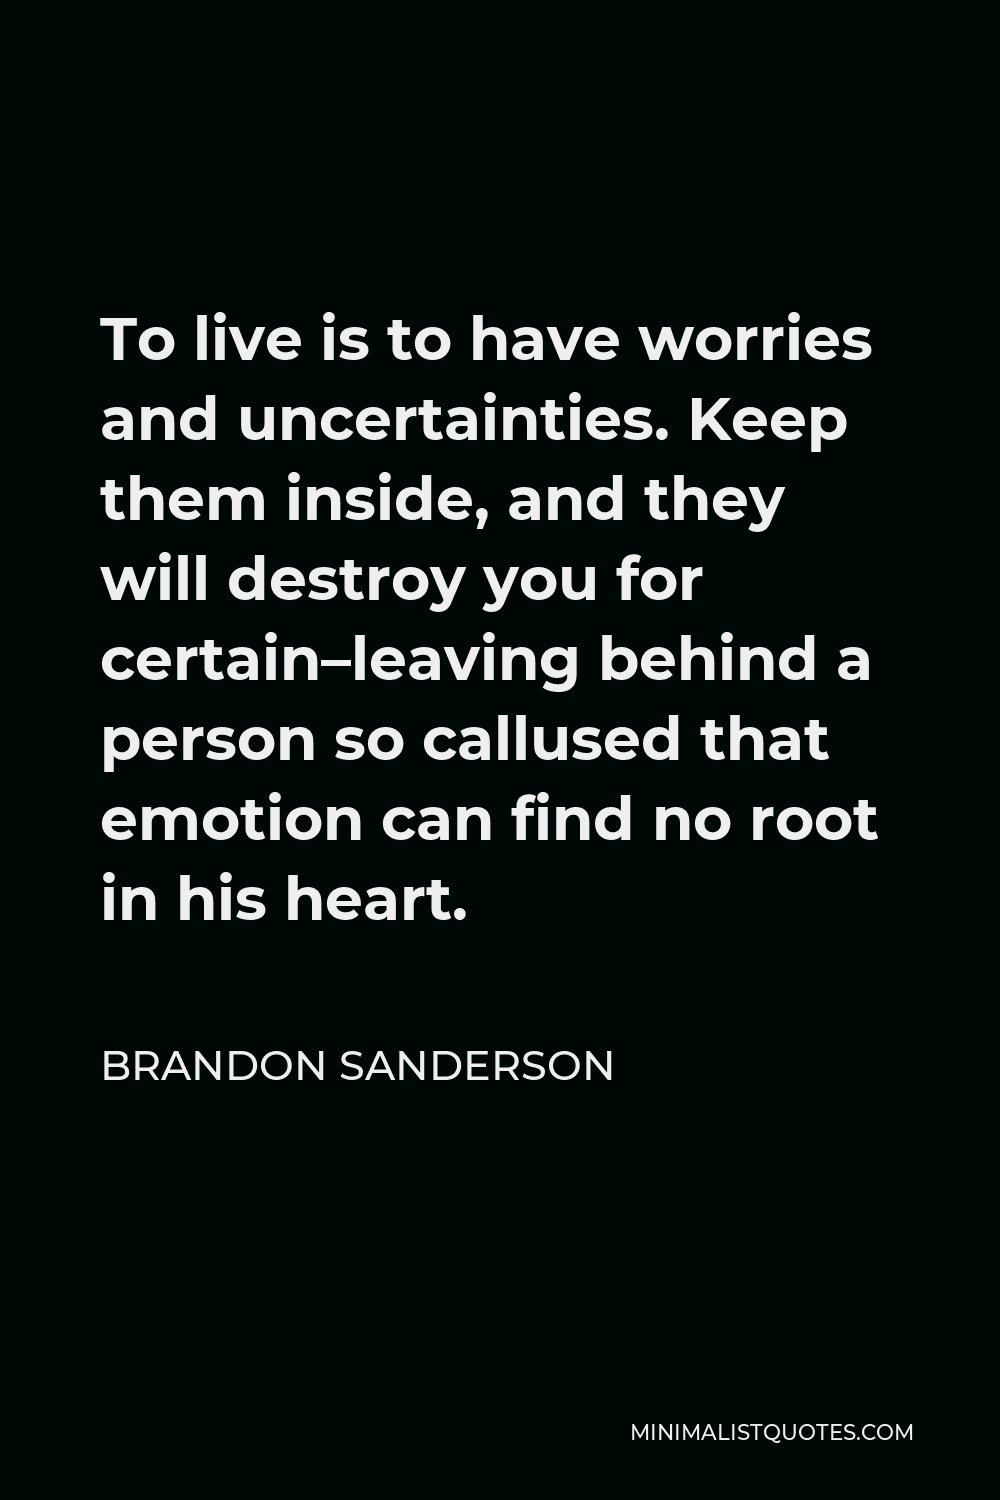 Brandon Sanderson Quote - To live is to have worries and uncertainties. Keep them inside, and they will destroy you for certain–leaving behind a person so callused that emotion can find no root in his heart.